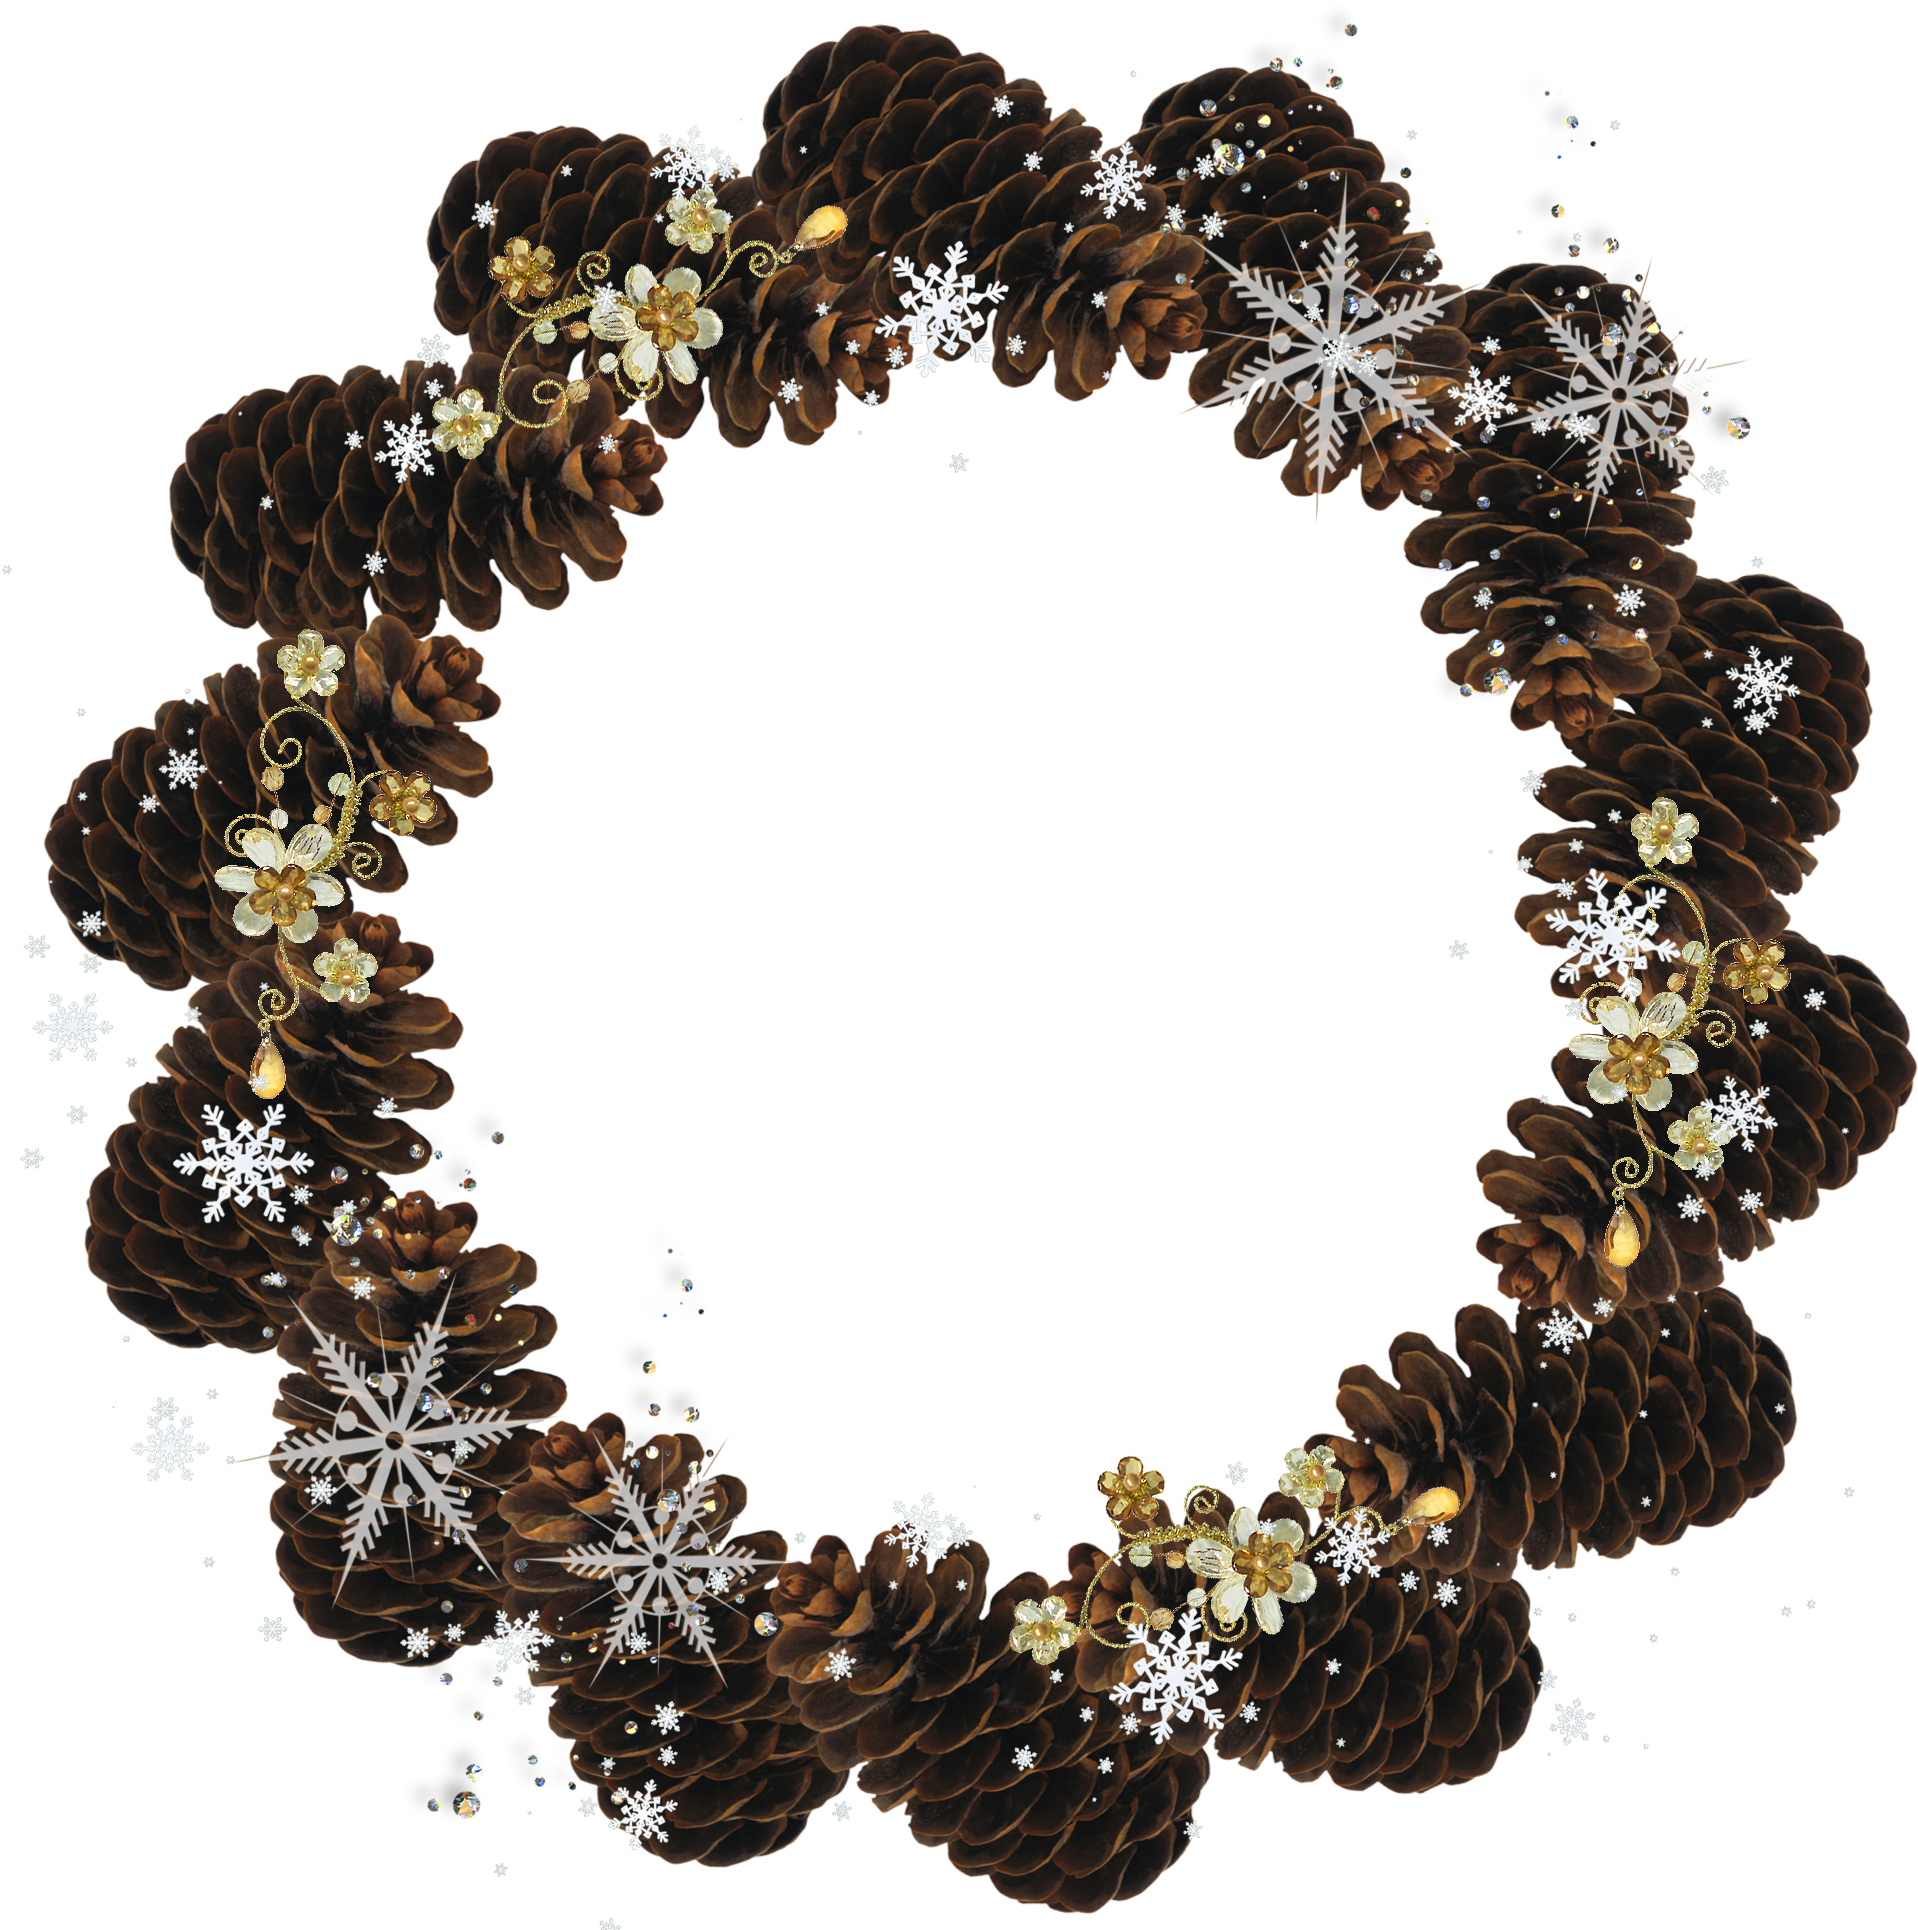 Round Christmas Frame PNG Background Image